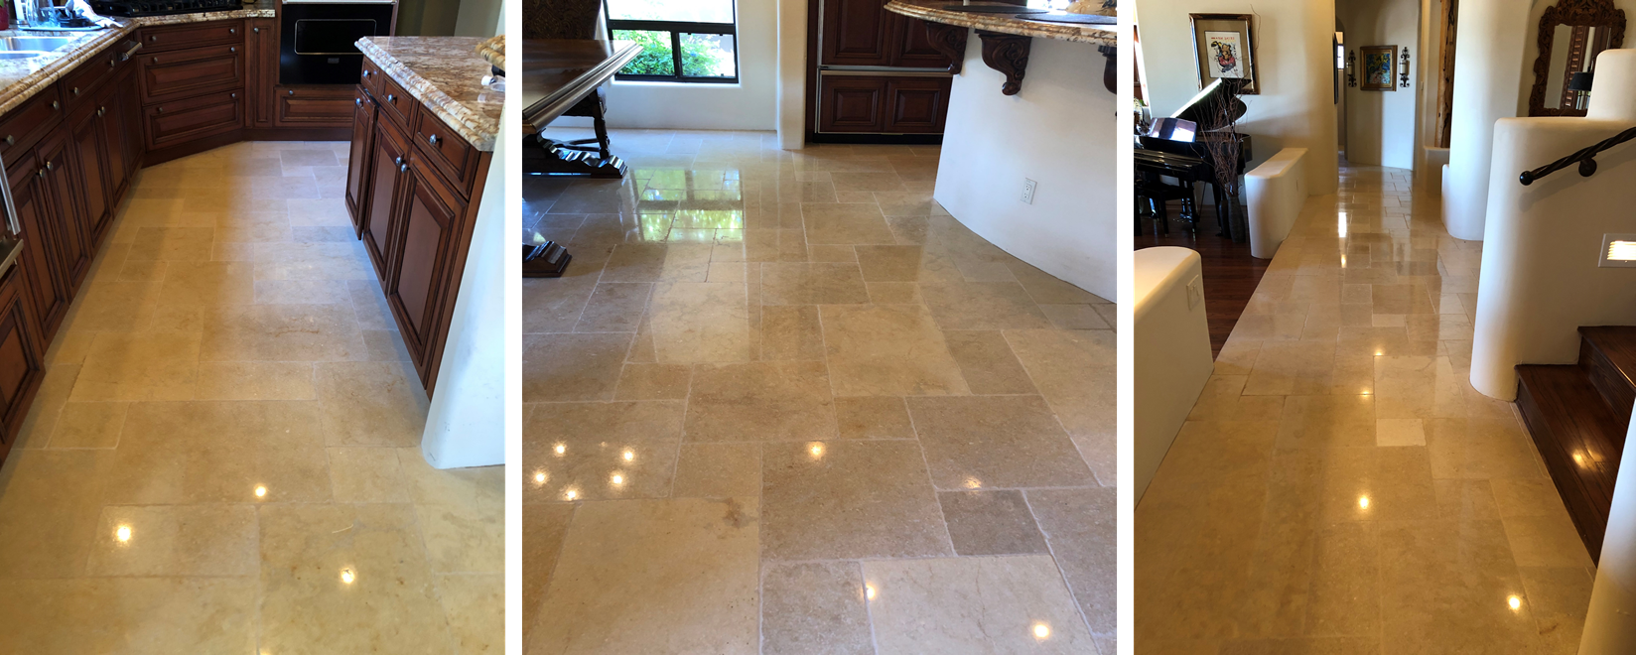 A collage of three pictures of a Limestone tiled floor in a kitchen and hallway